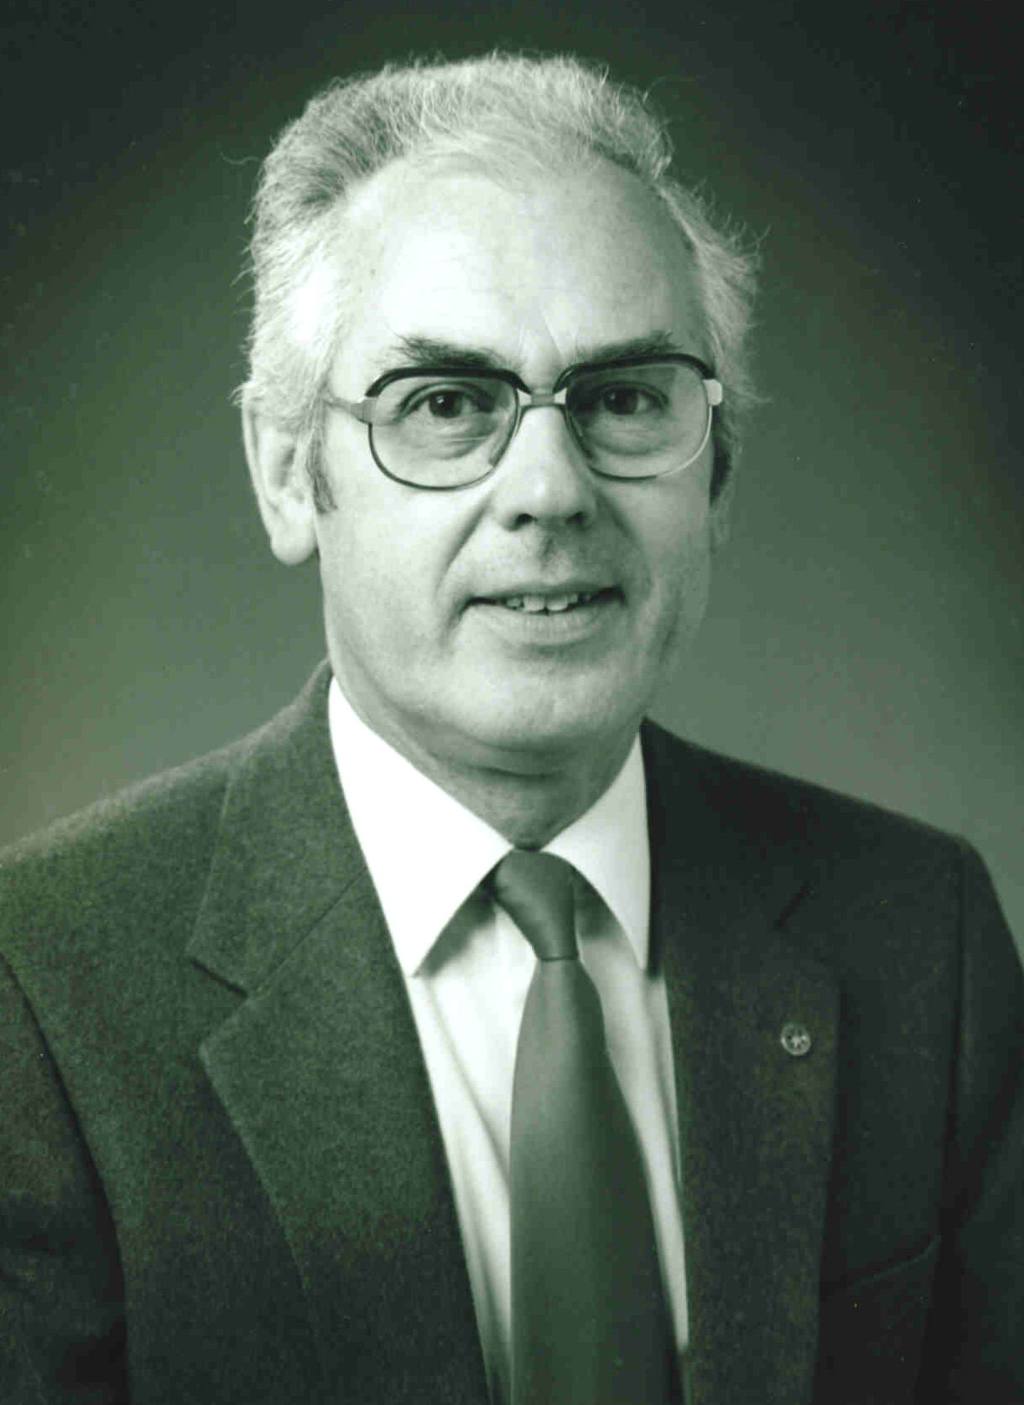 Past Presidents 1980-1989 (click here) - Donald Kenneth Webster 1983/4